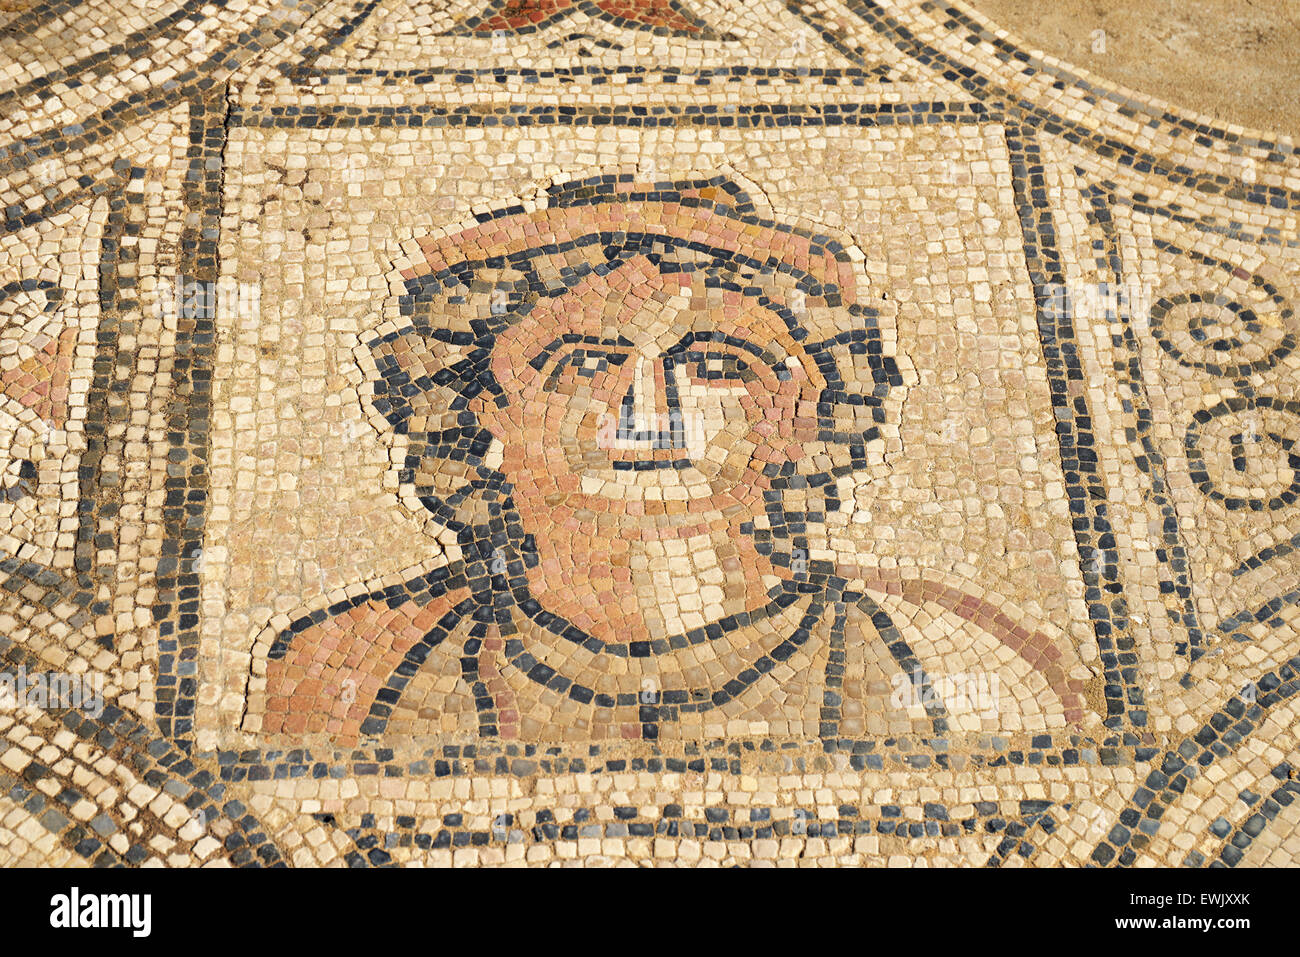 A mosaic in the Roman ruins of Volubilis,  House of the Labor of Hercules, Meknes region, UNESCO, Morocco, Africa Stock Photo